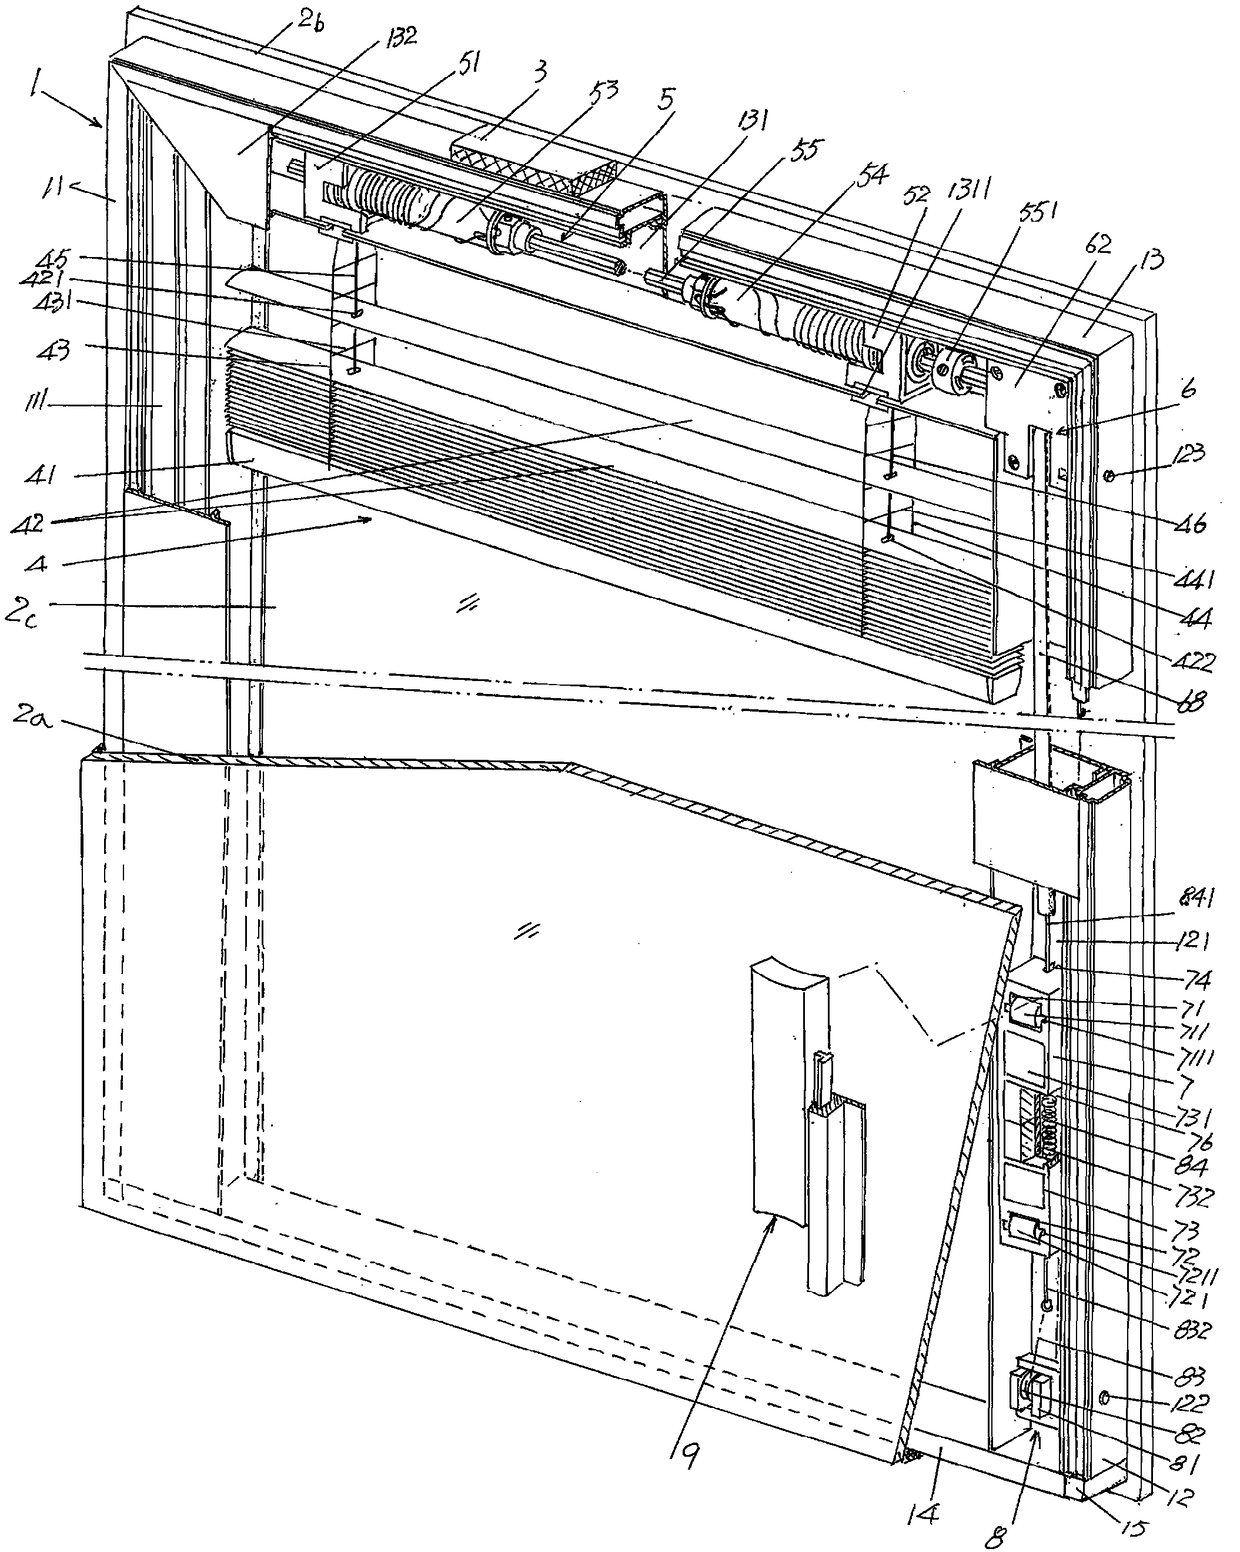 Internal control mechanism for window shutter with built-in hollow glass